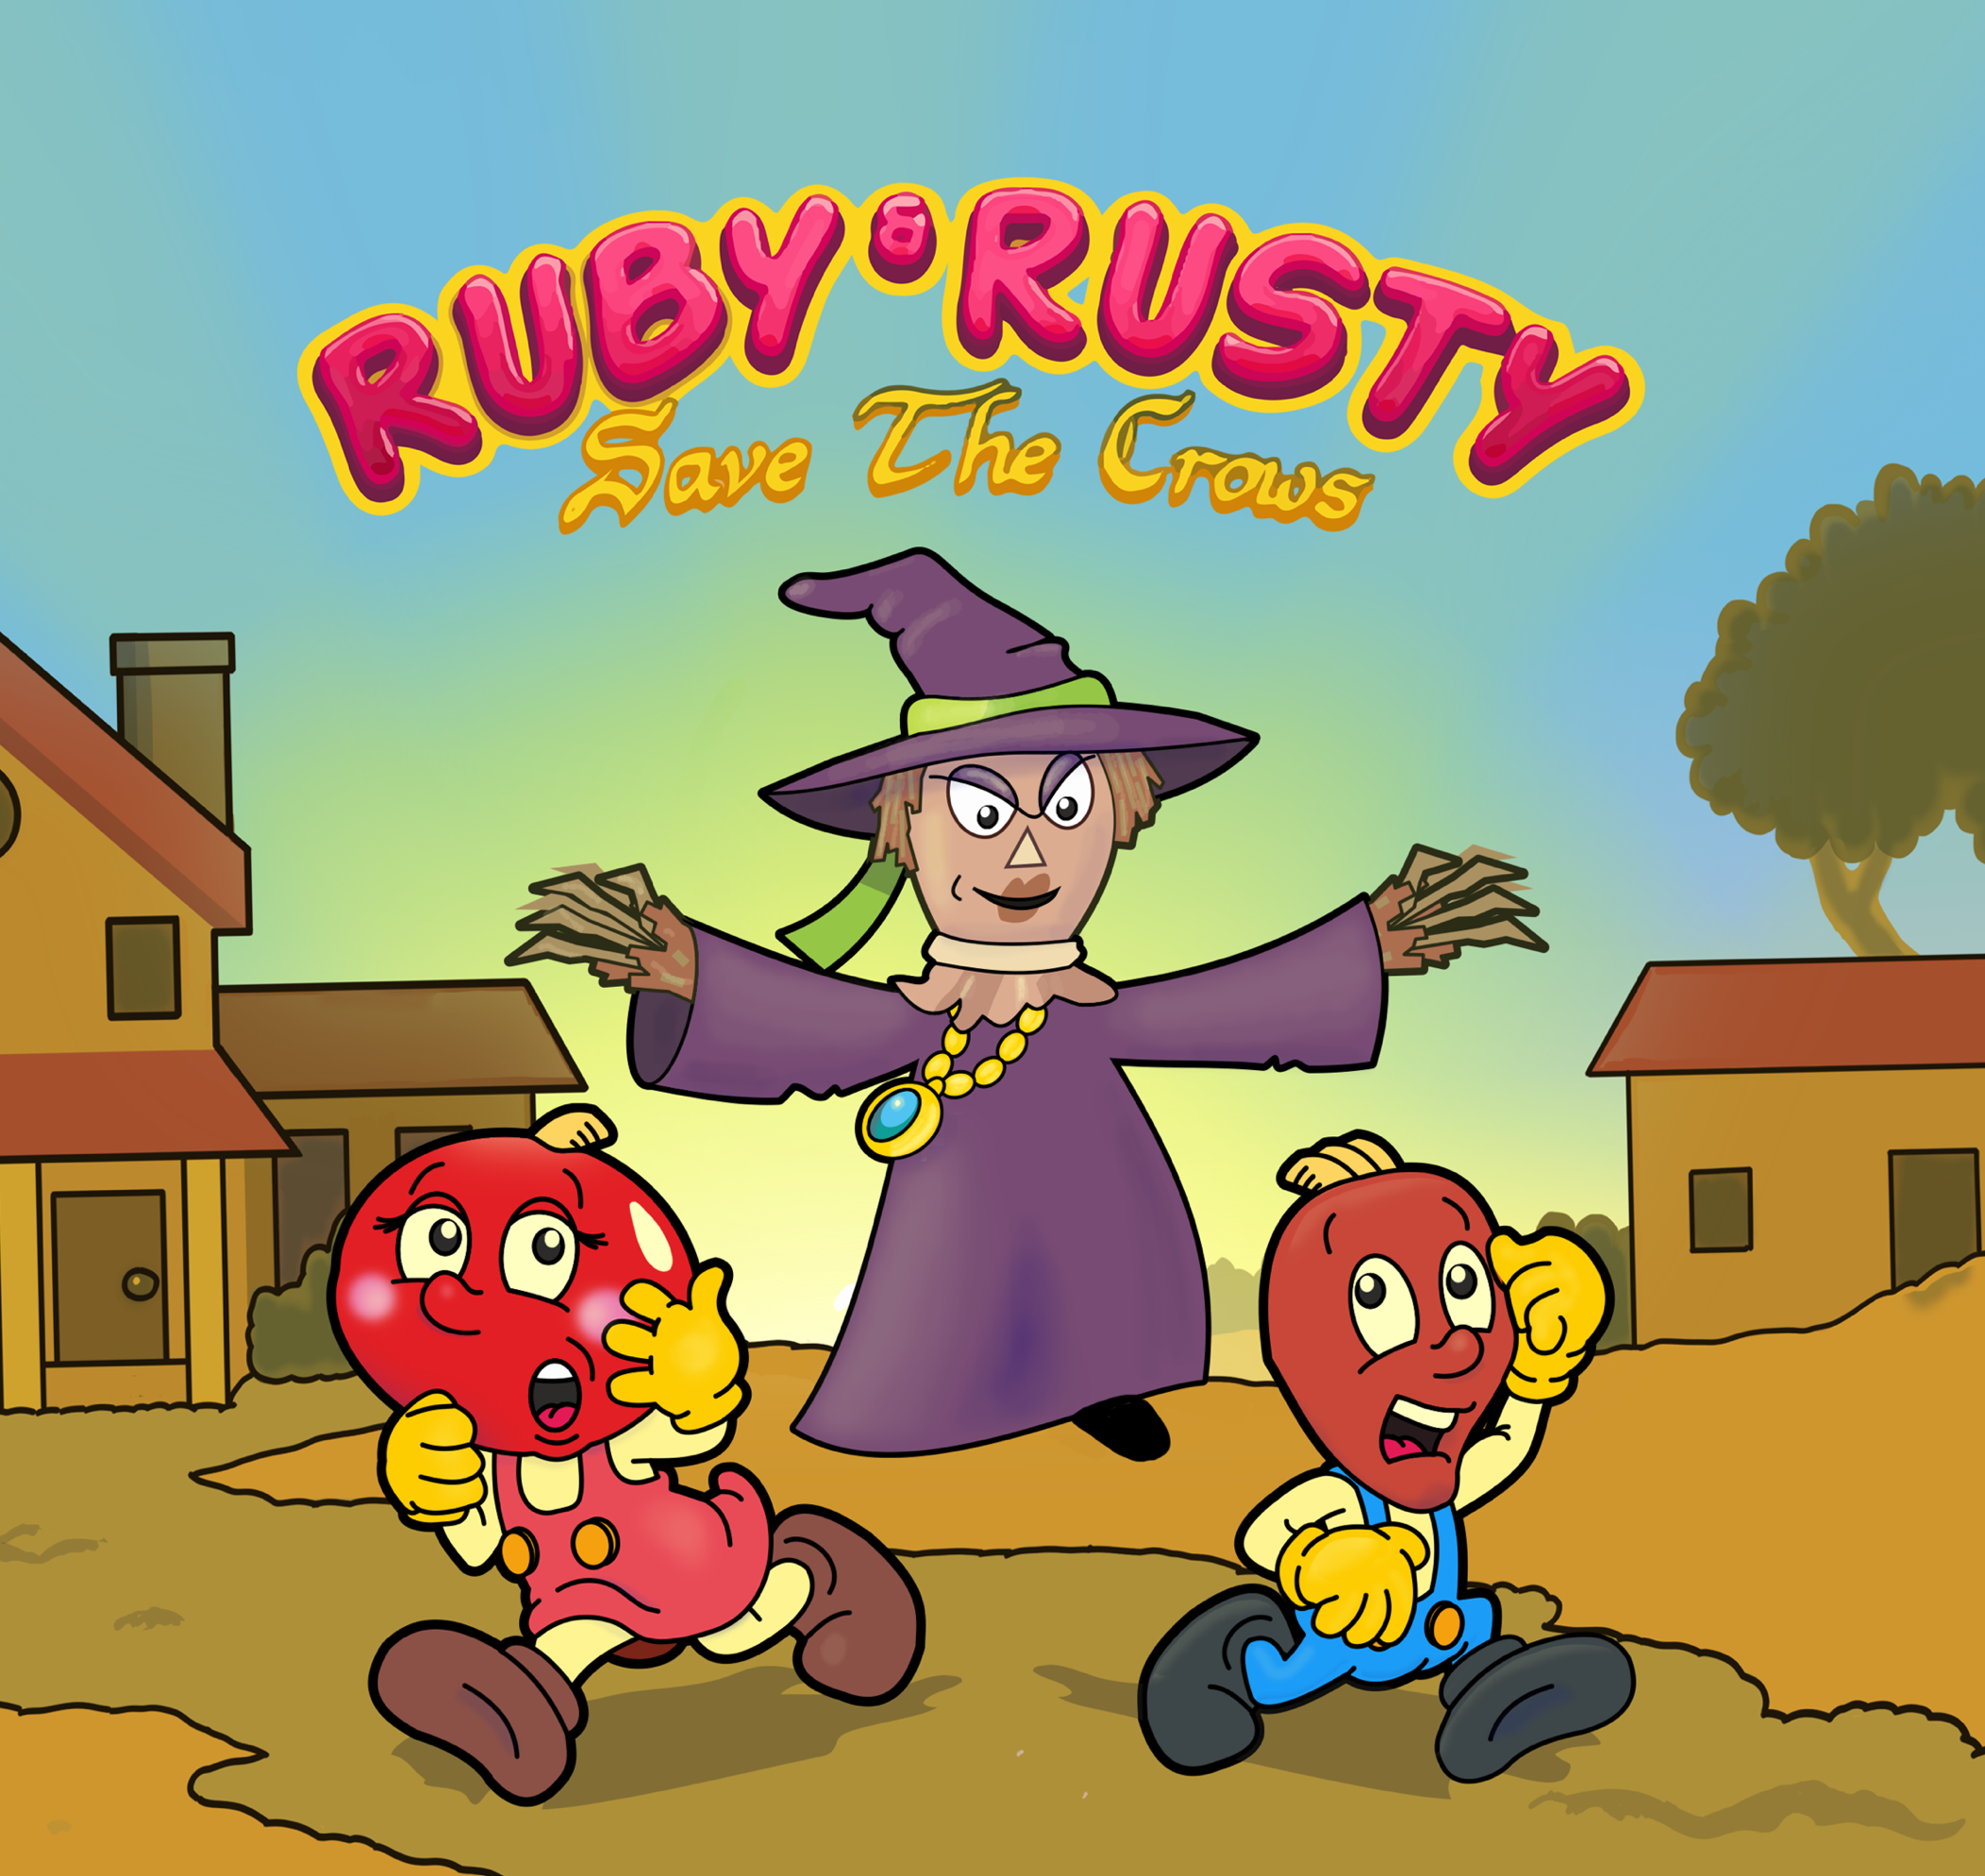 Ruby & Rusty Save the Crows